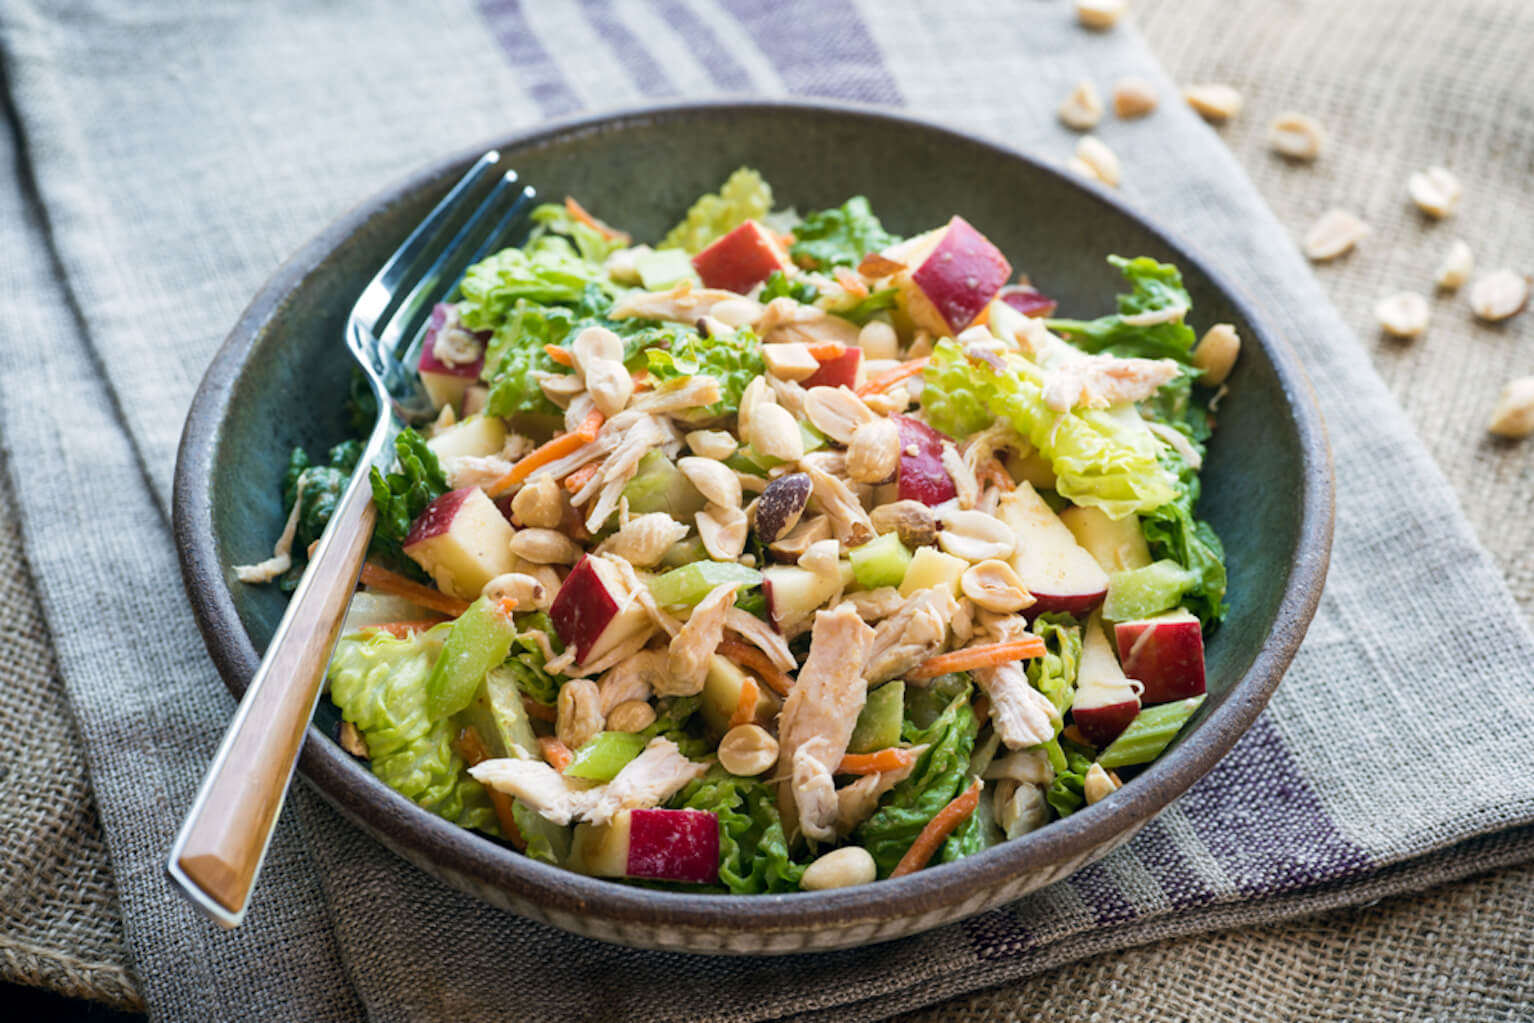 Crunchy Asian chicken salad with peanuts